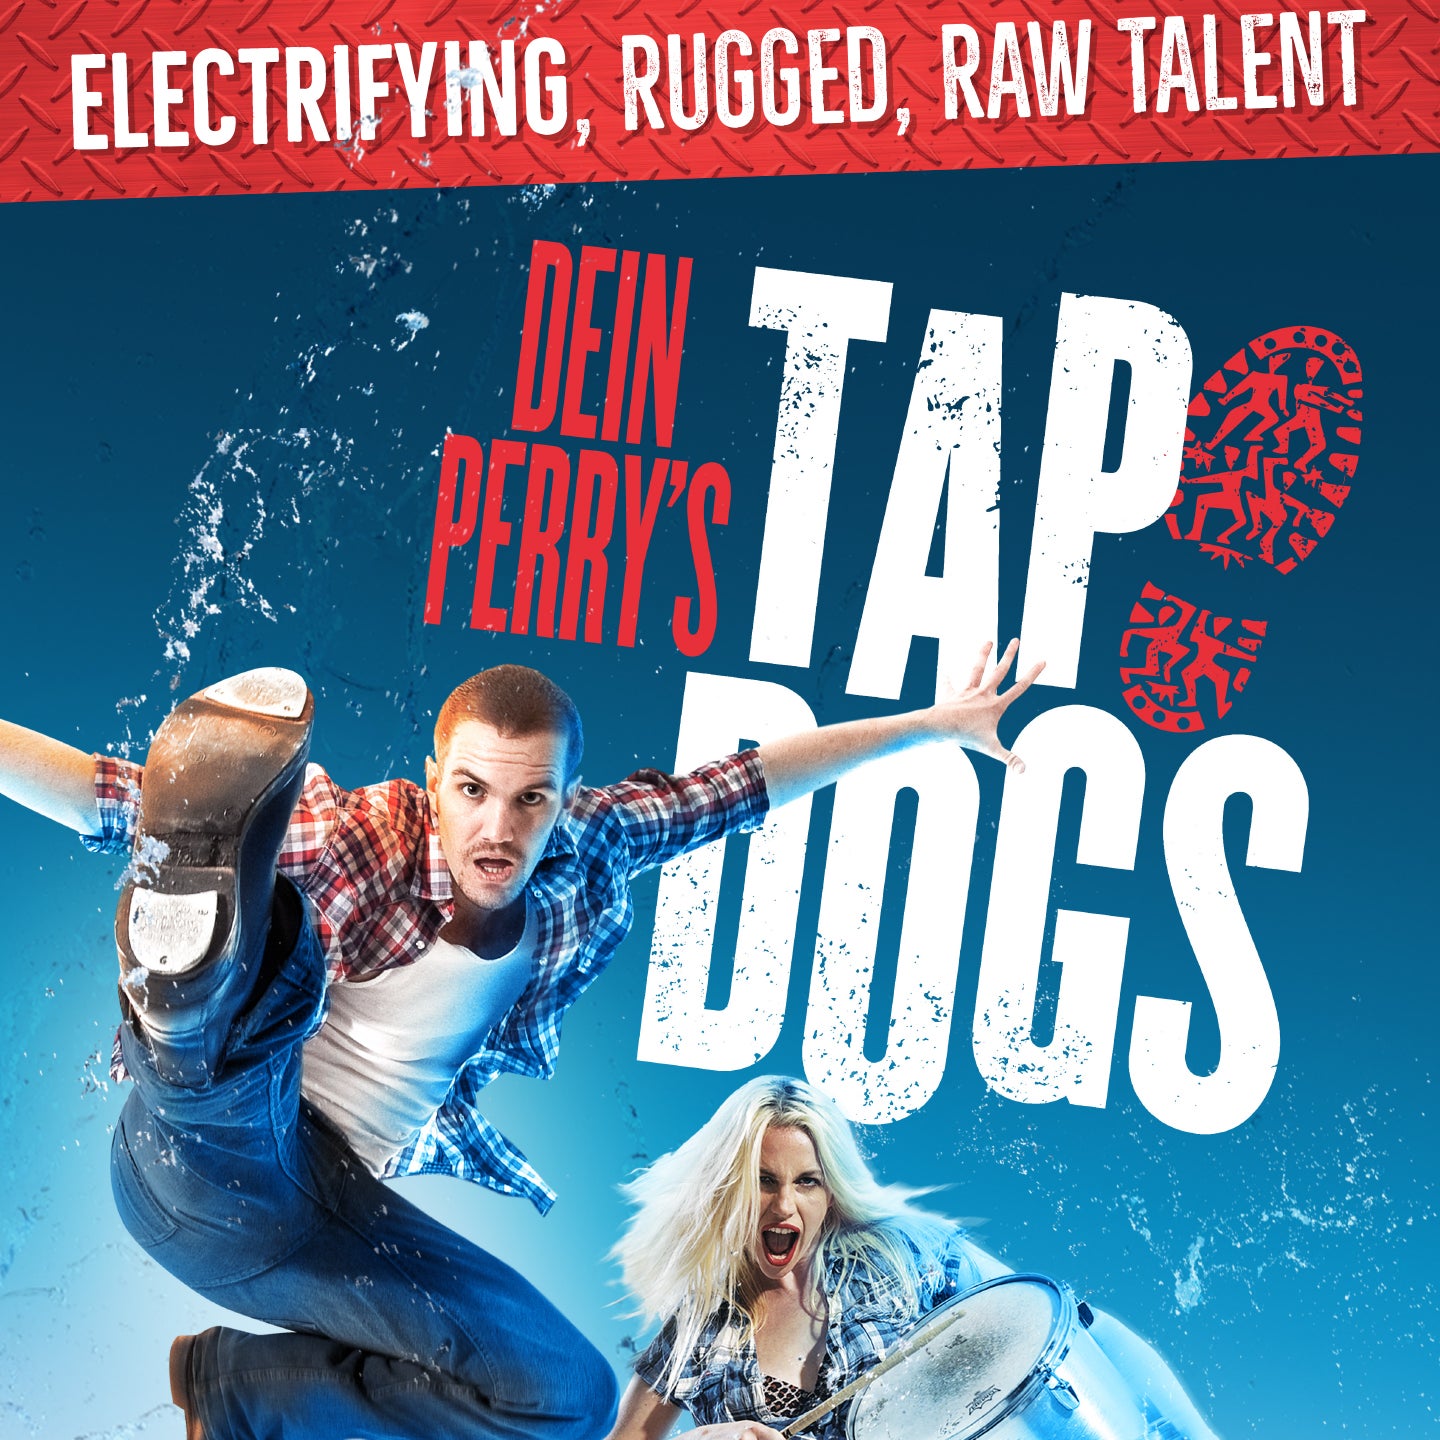 Tap Dogs